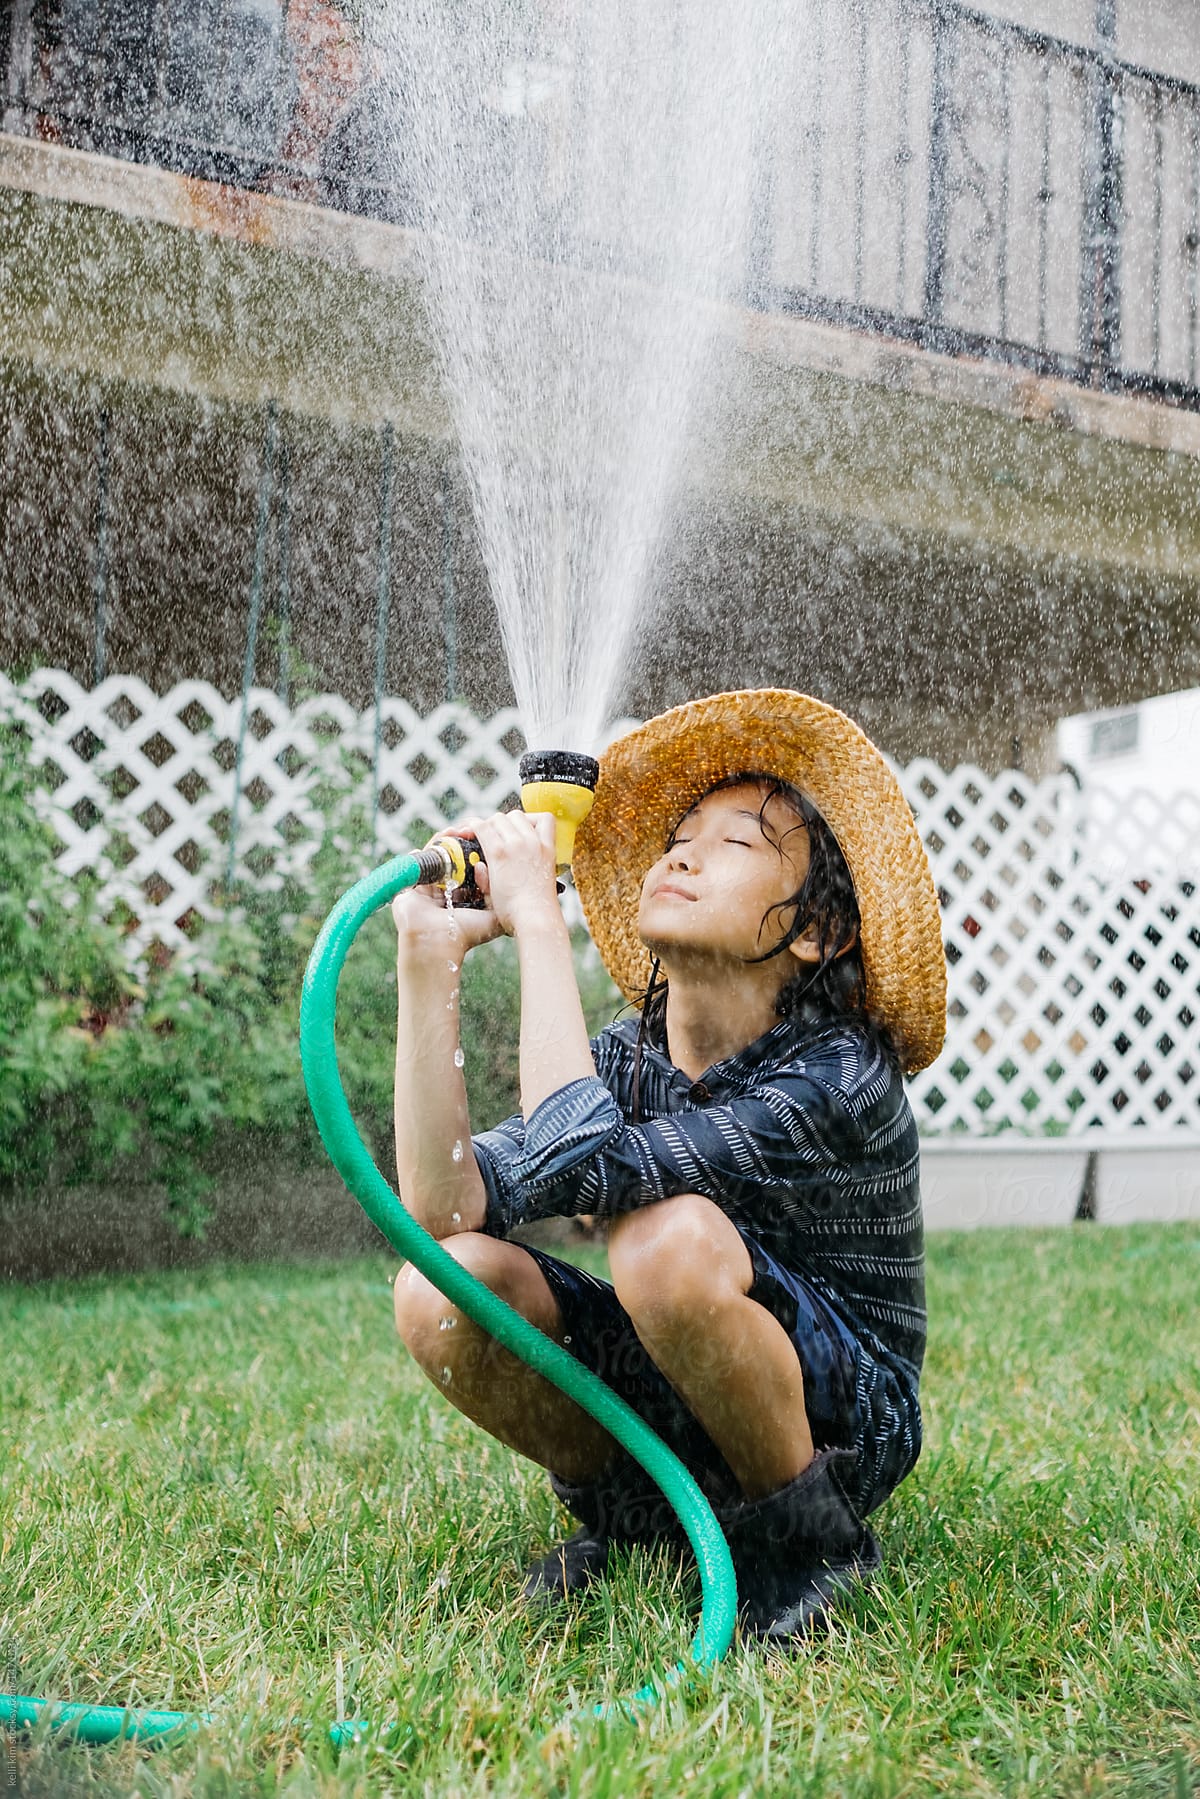 Young boy playing with garden hose in backyard